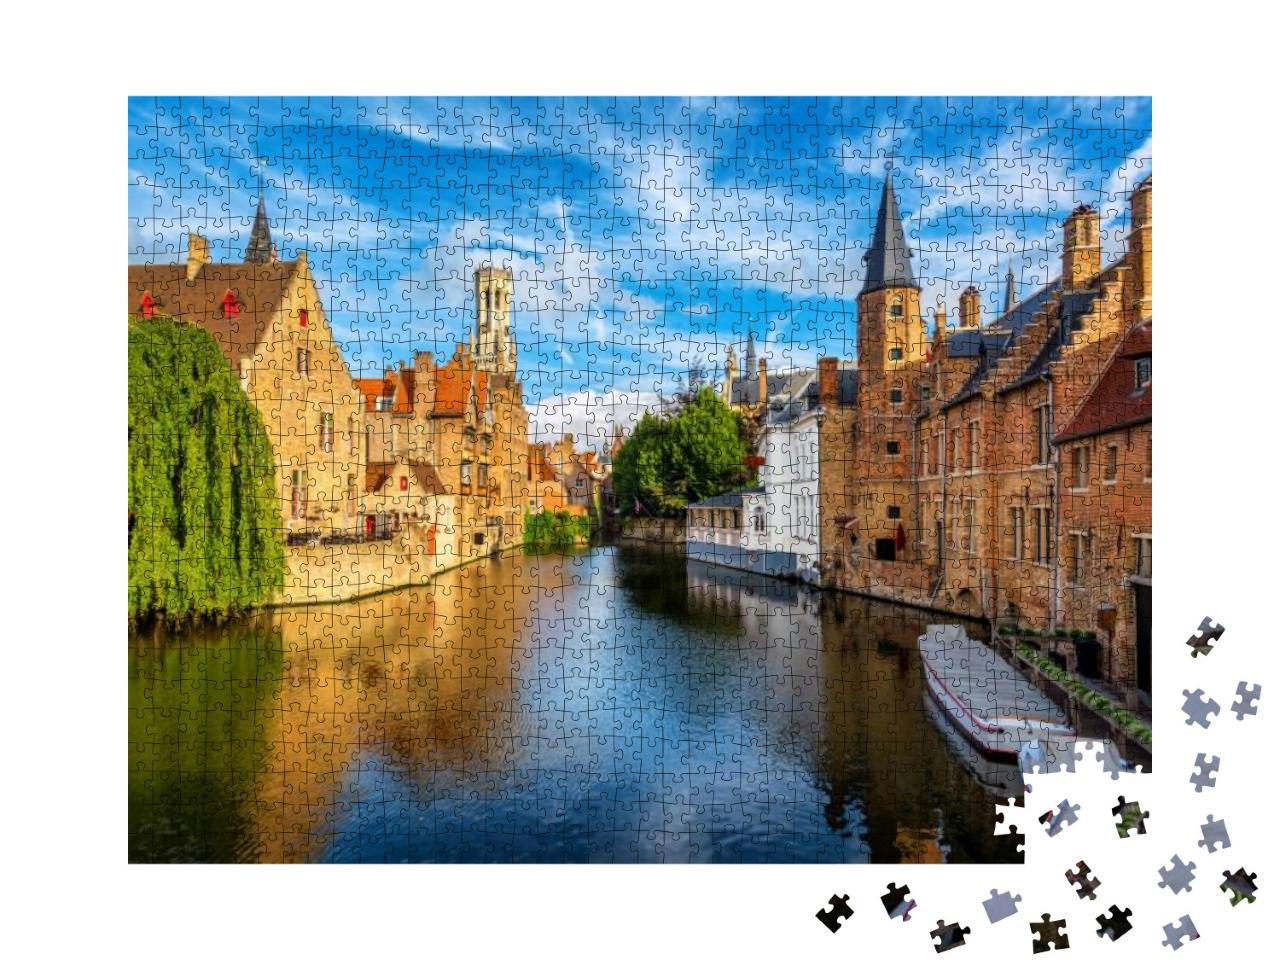 The Rozenhoedkaai Canal, Historical Brick Houses & the Be... Jigsaw Puzzle with 1000 pieces